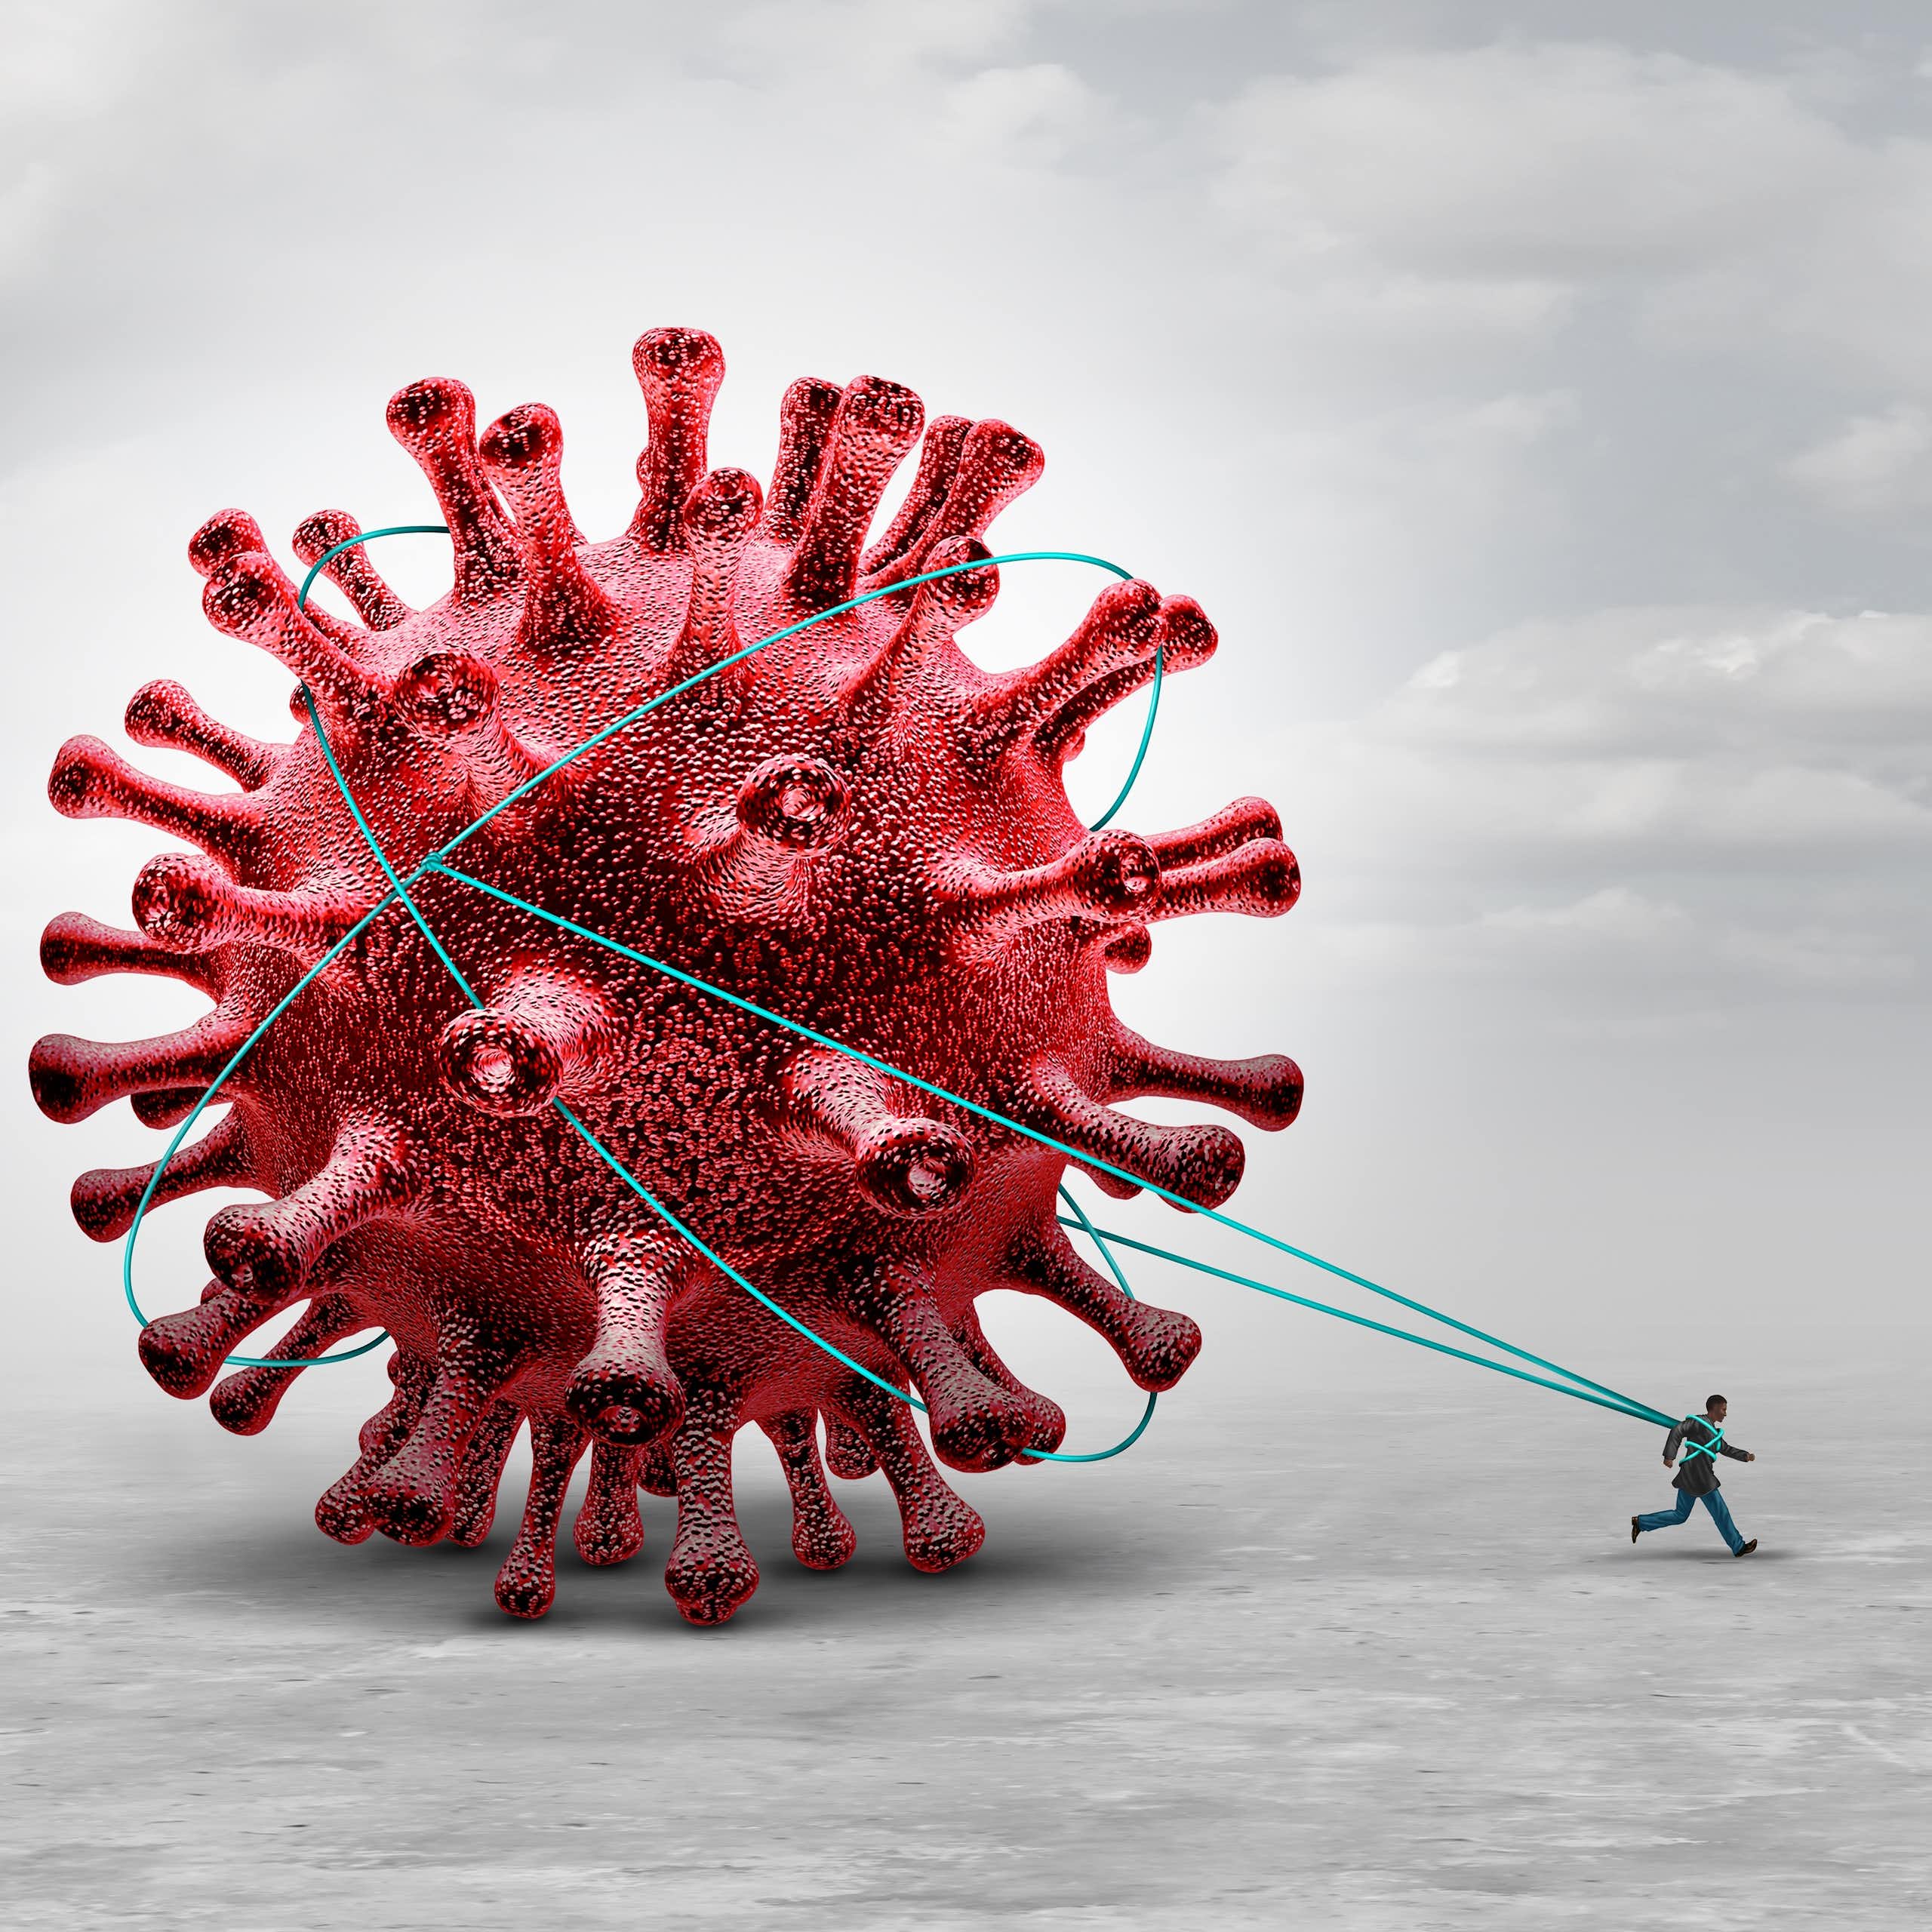 Illustration of a human figure tied to a large COVID-19 virus behind him